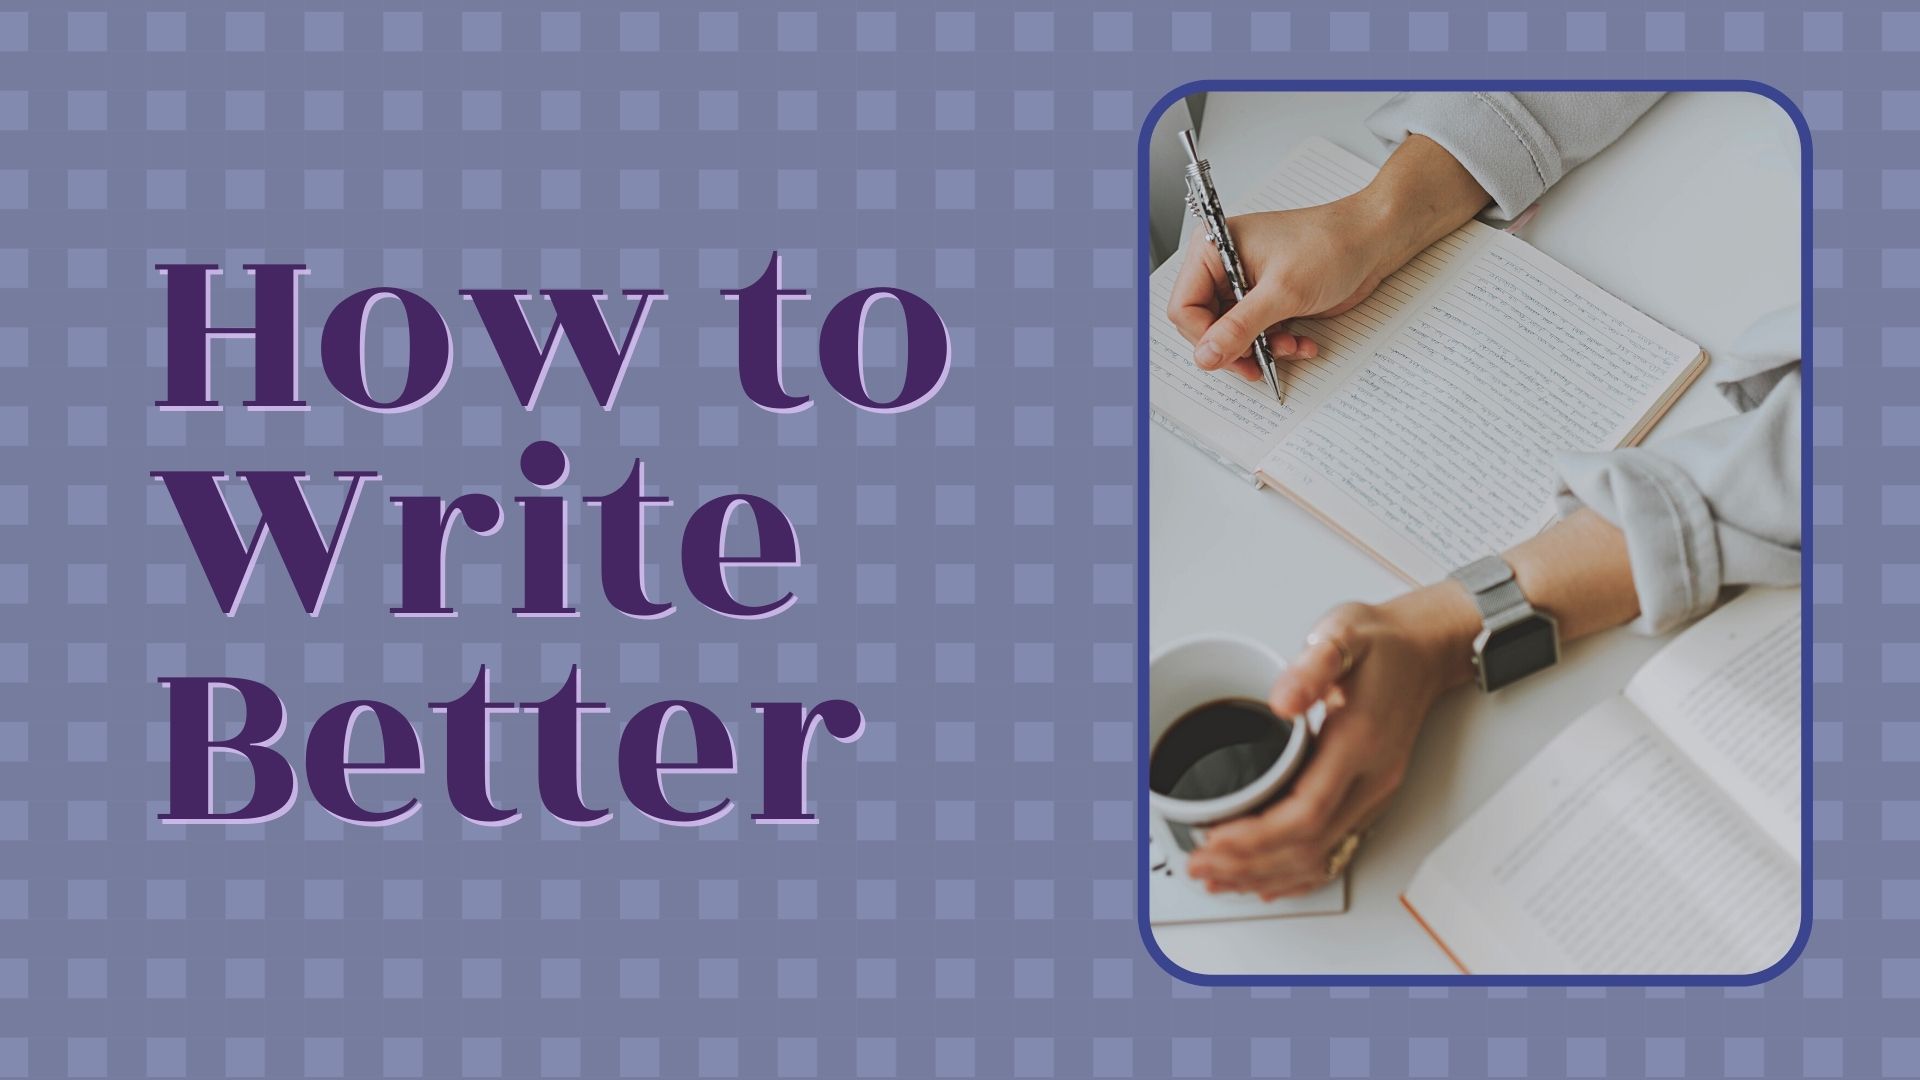 How To Write Better? Basic Writing Skills For Students